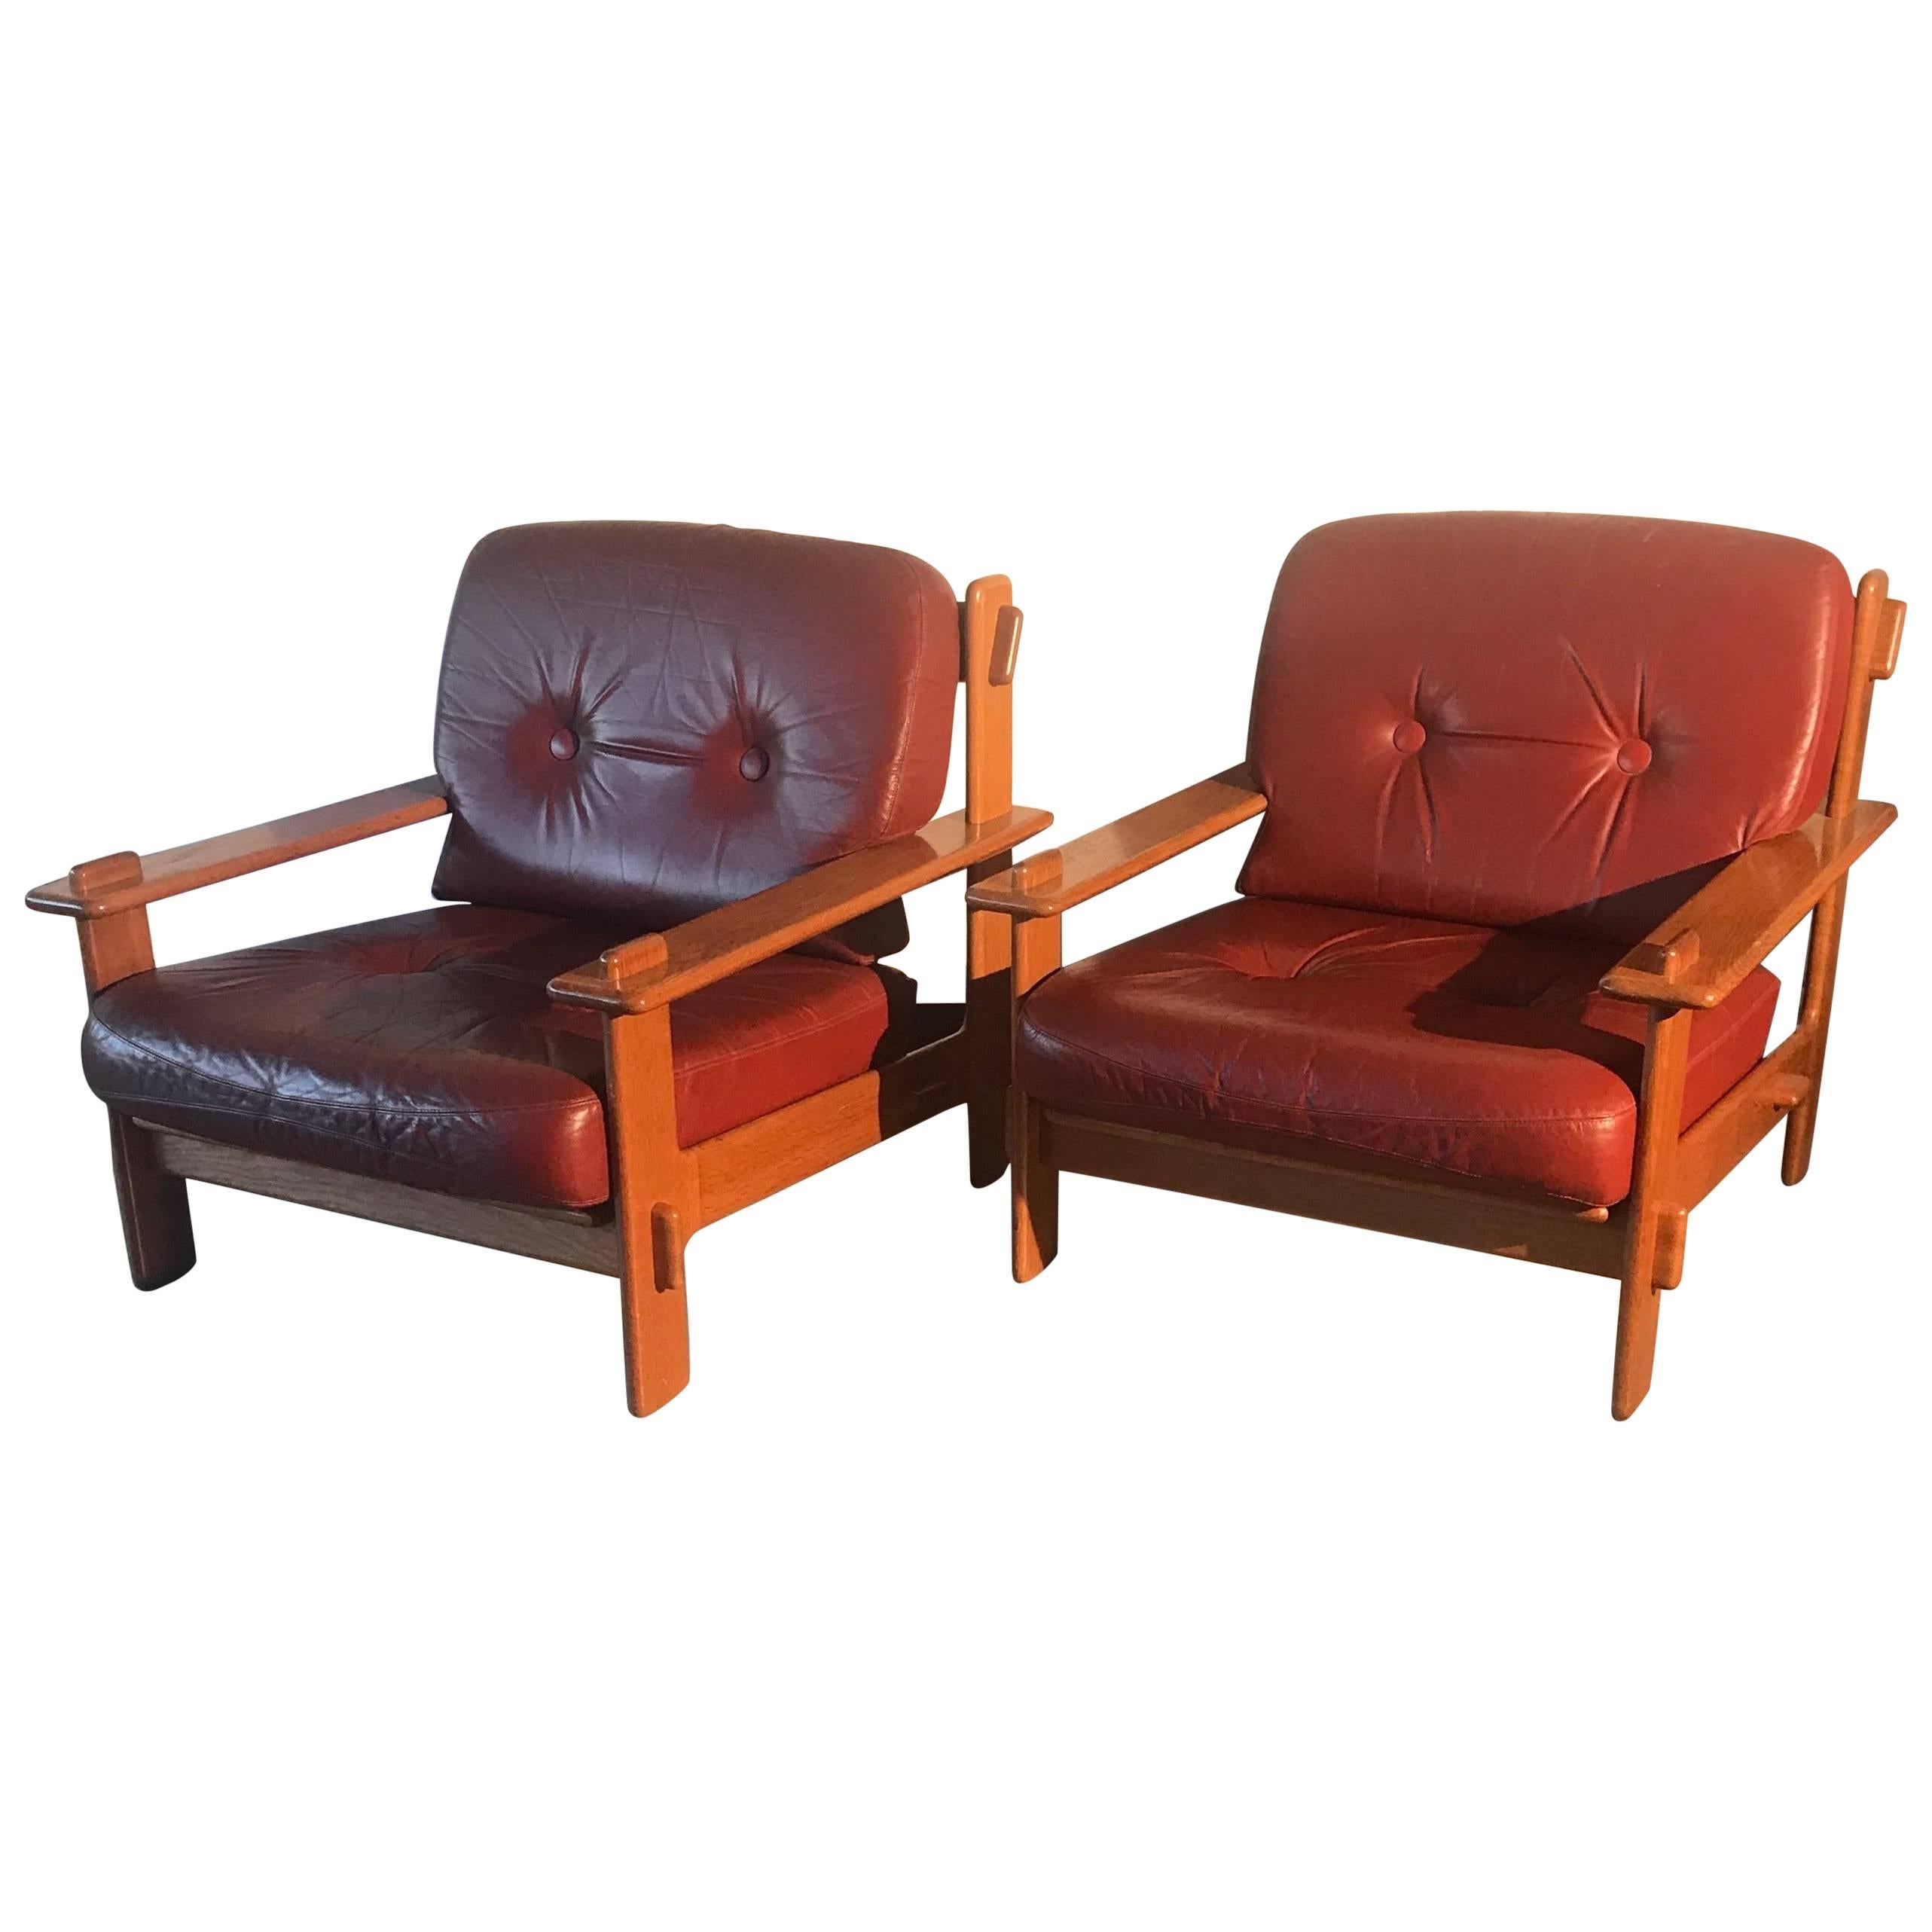 Late 20th Century Scandinavian Design Oak & Leather Lounge Chairs Great Quality